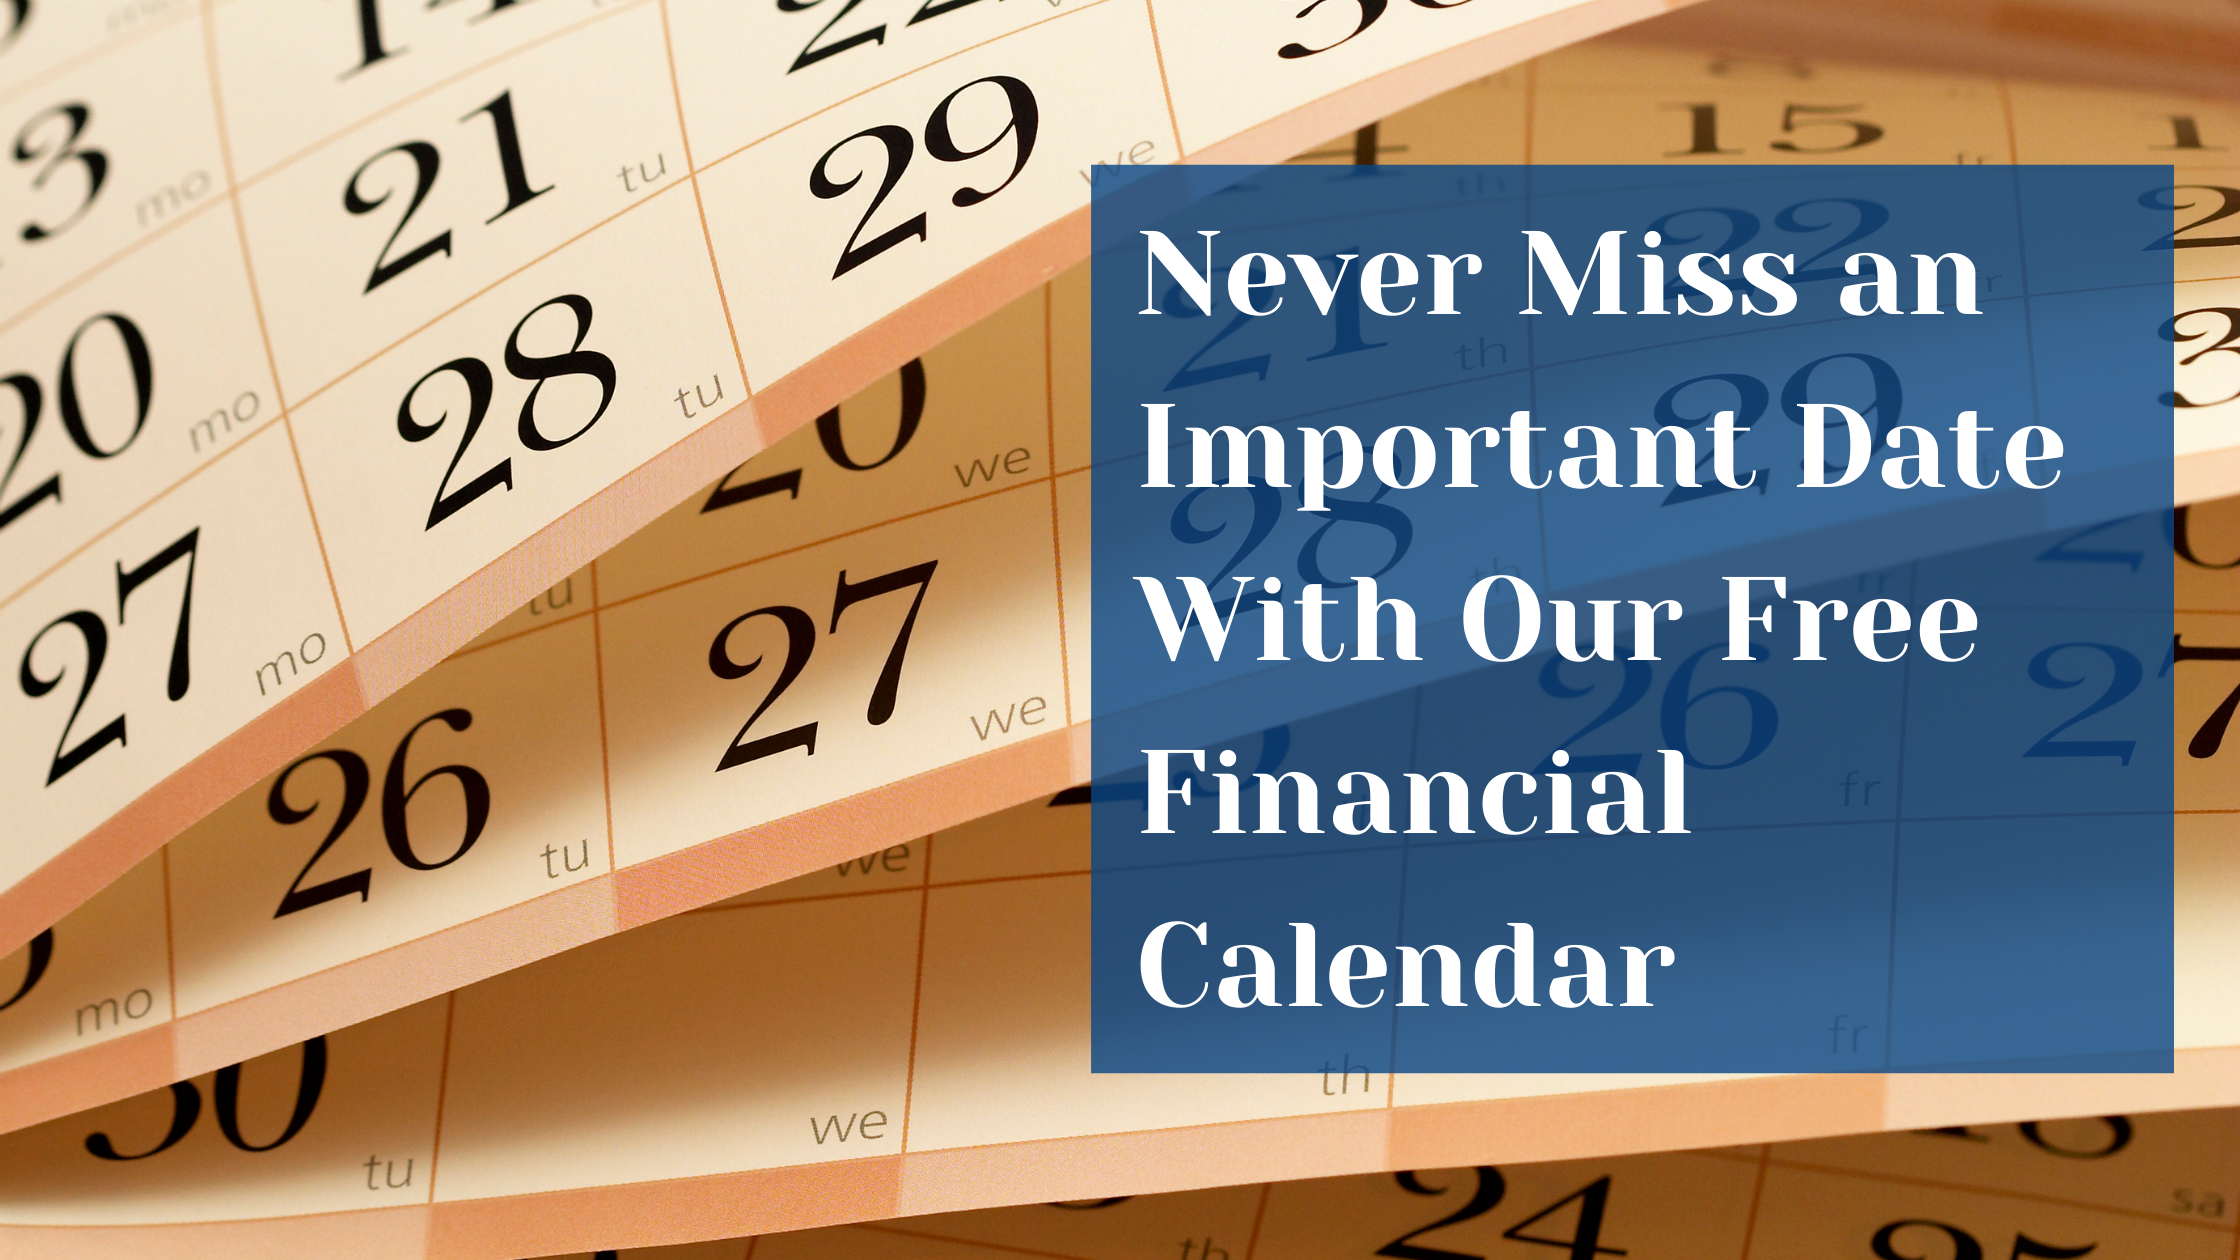 Introducing Our Free Financial Calendar: Seamlessly Stay Up-To-Date